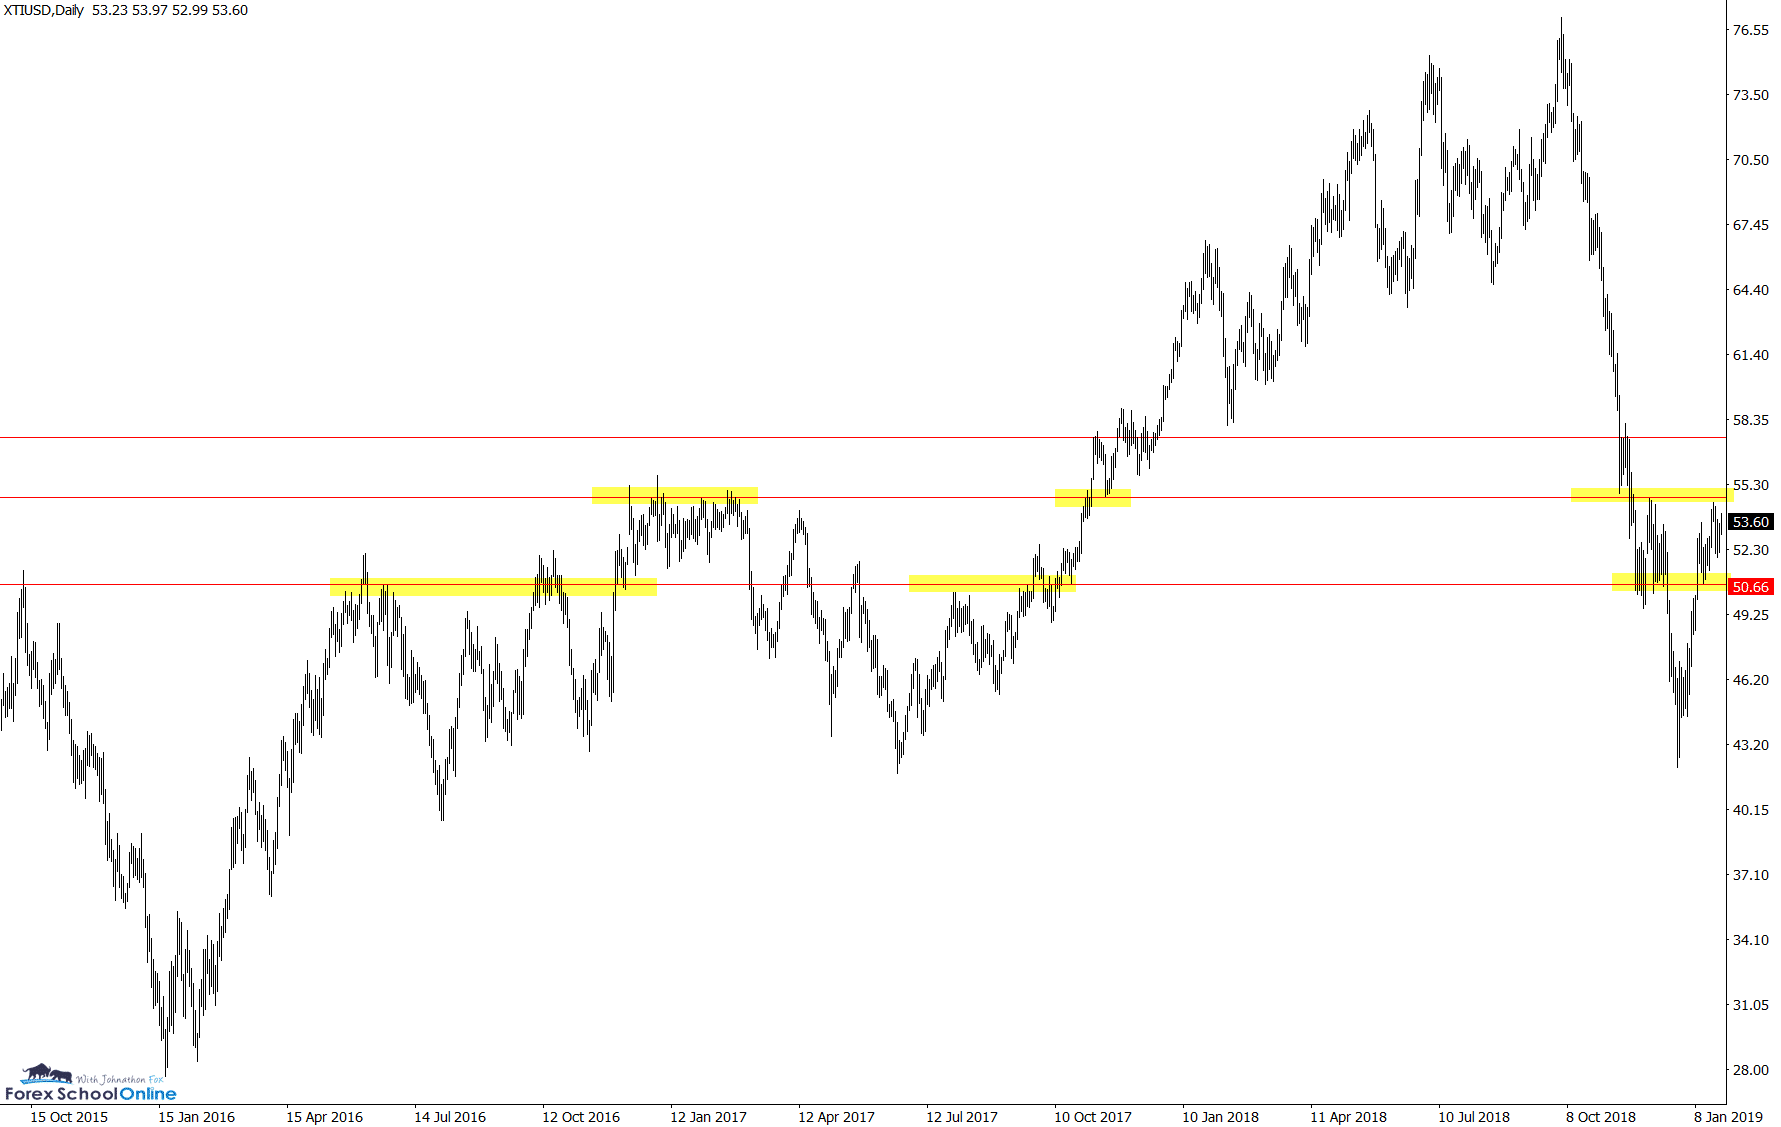 Oil Daily Chart Zoomed Out